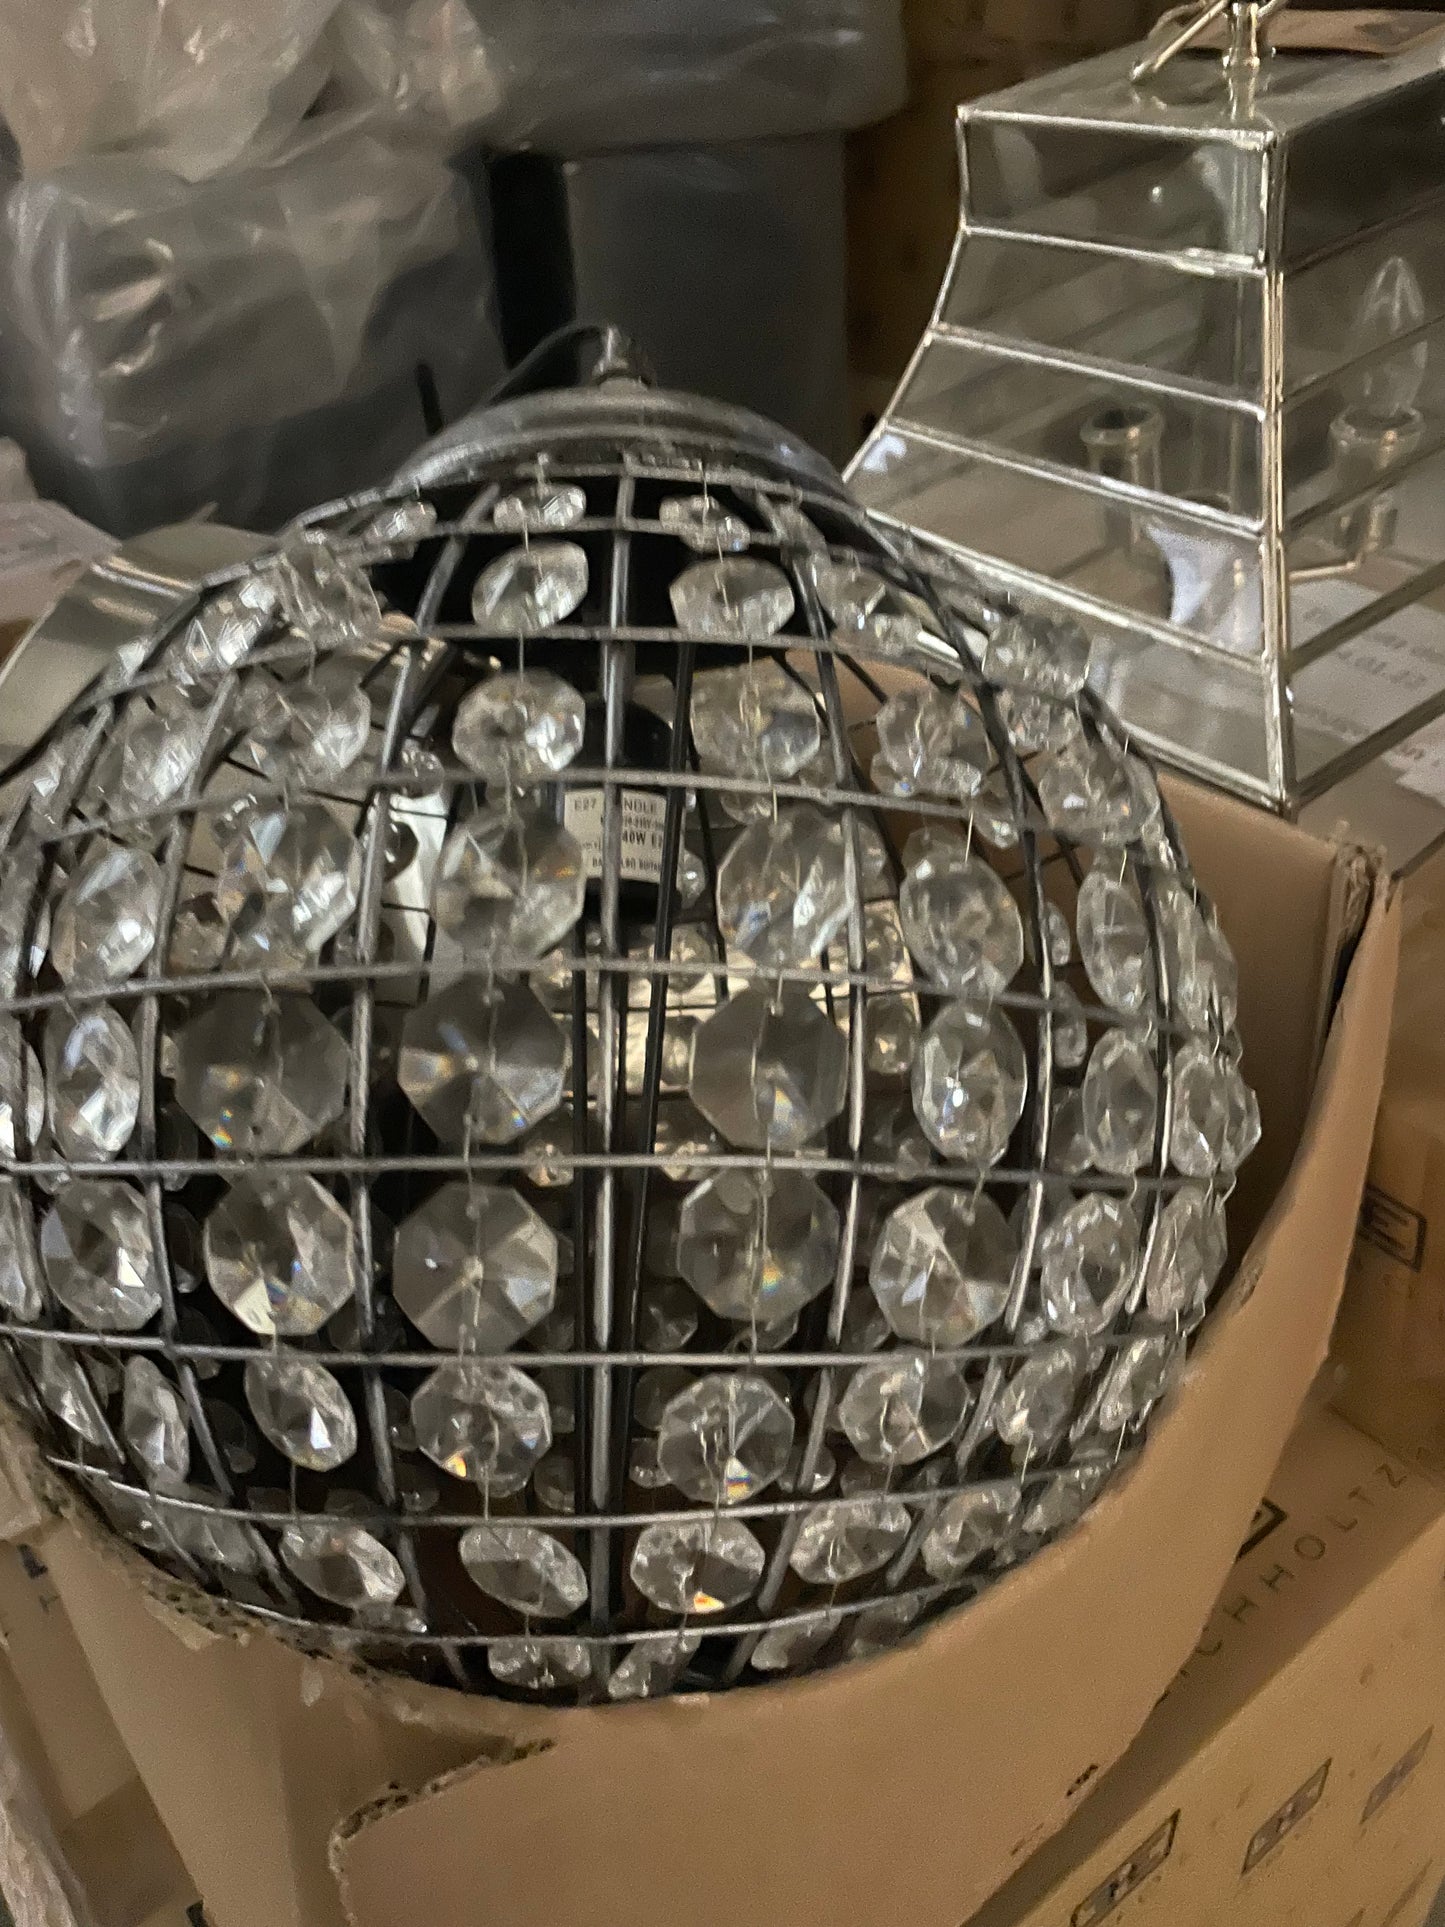 Hanging Ball Lamp with Crystals Cheyenne Size 3 instore purchase